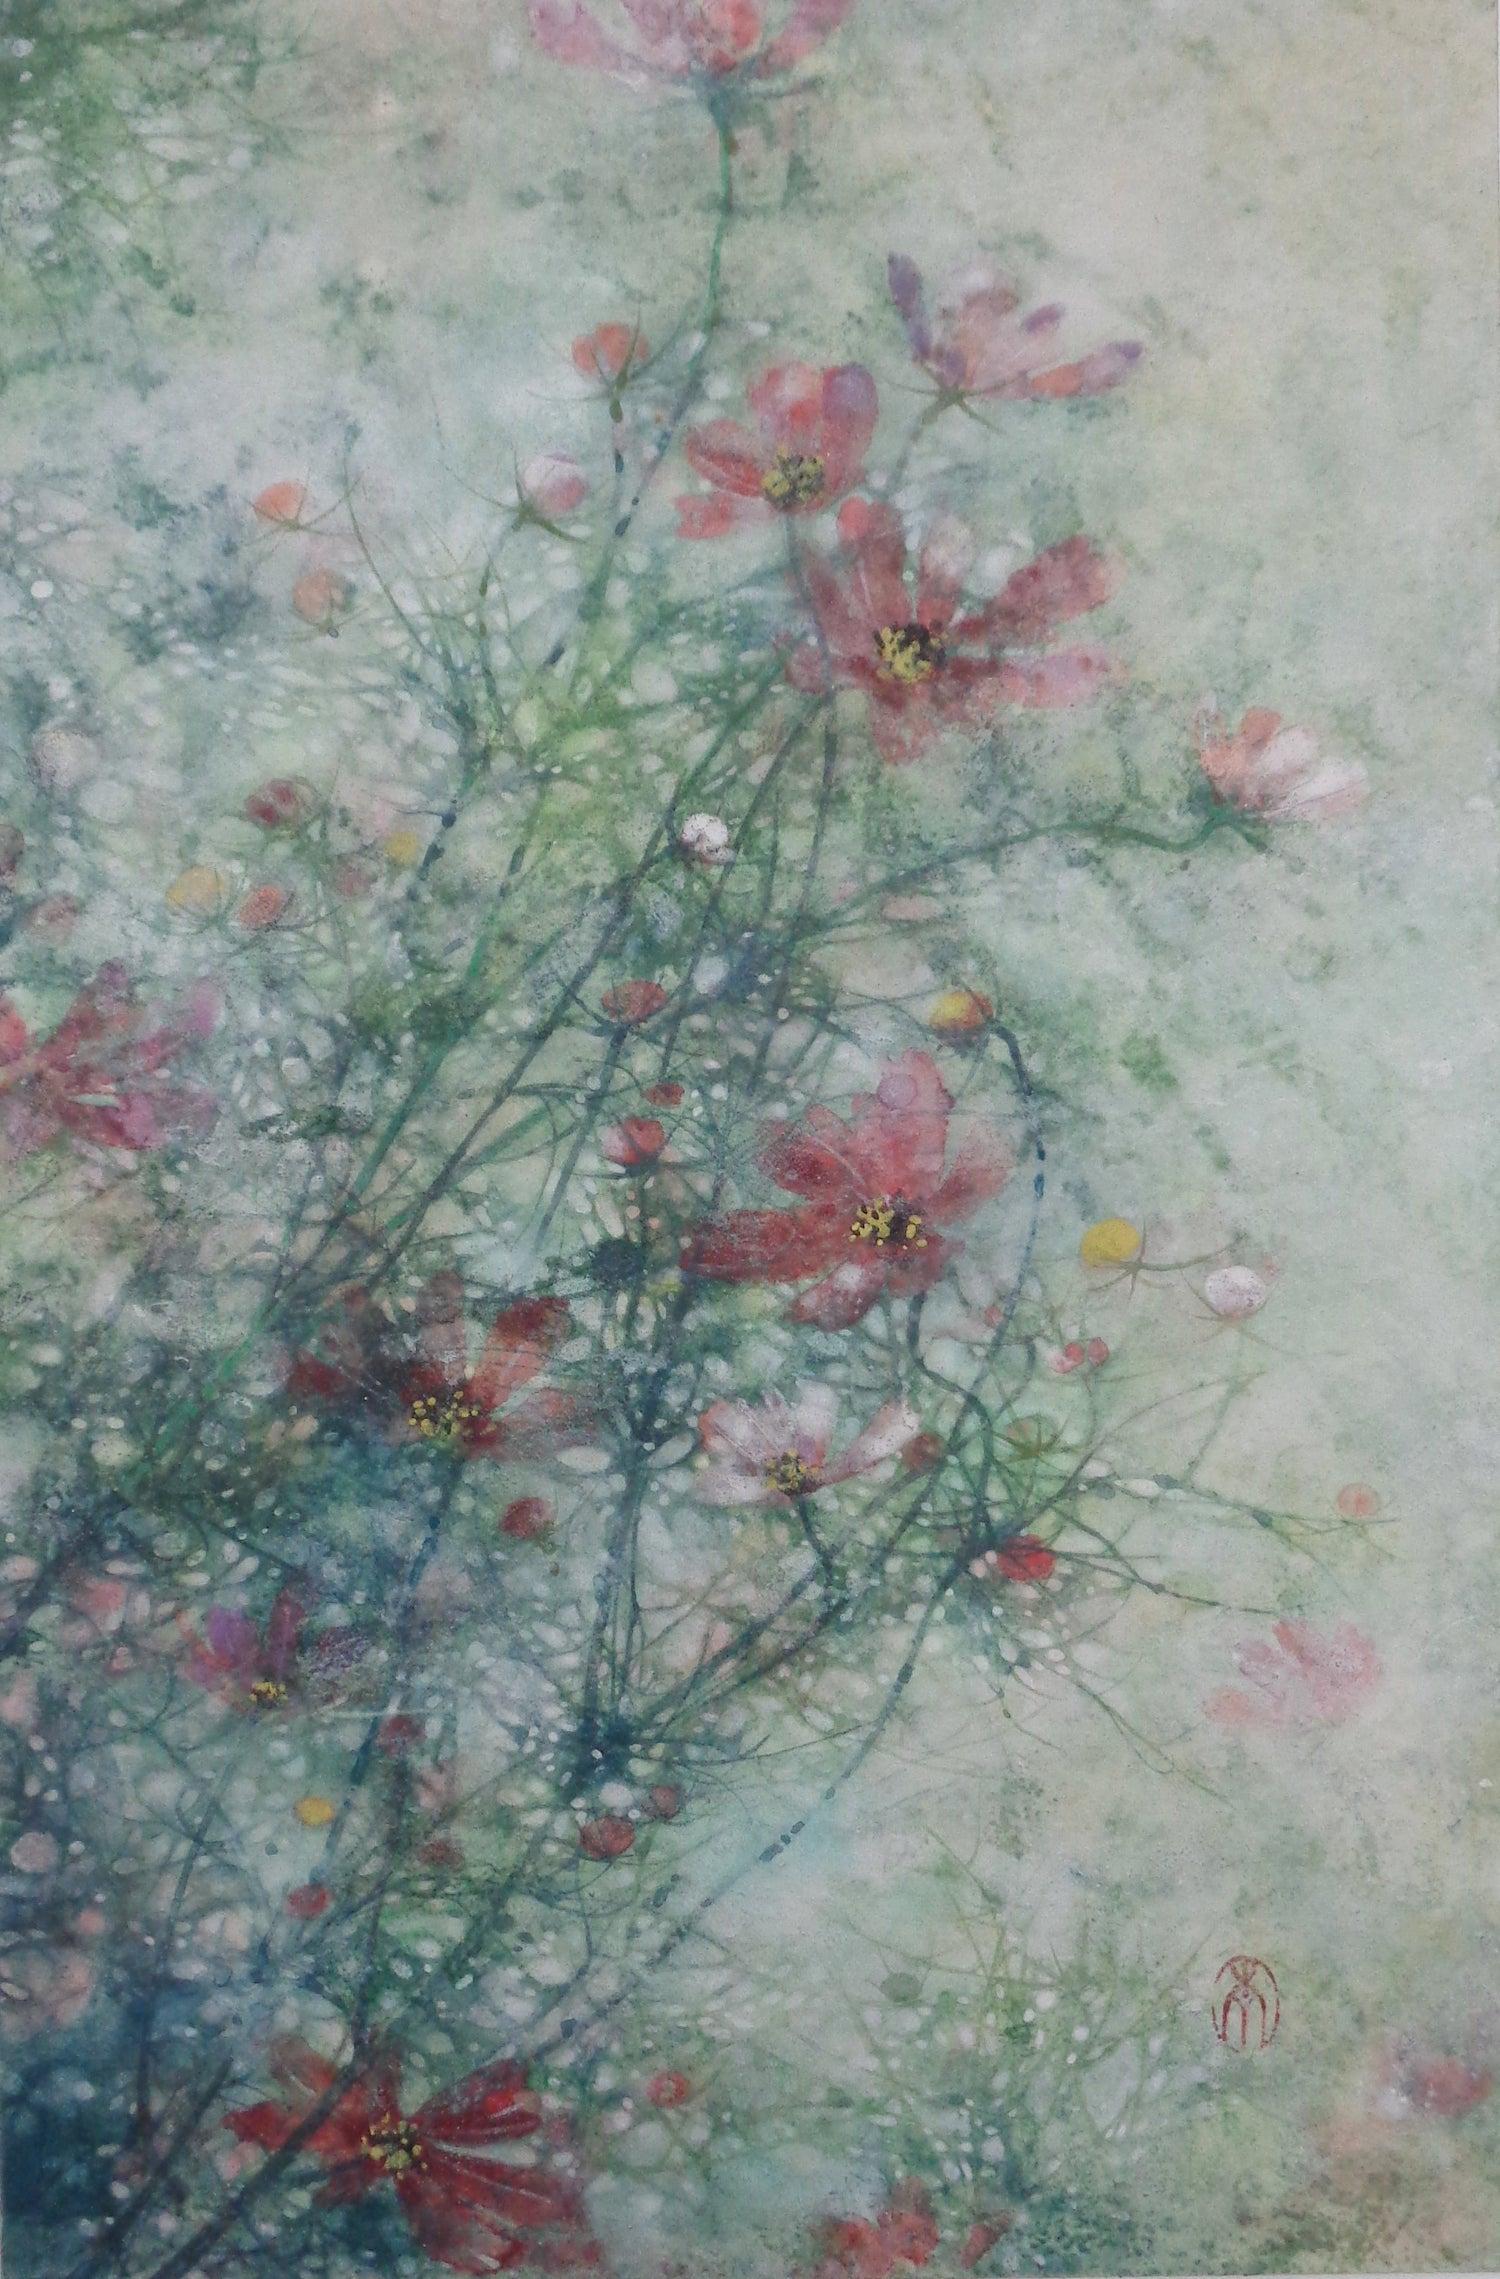 Yiching Chen Figurative Painting - Cosmos by CHEN Yiching - Contemporary Nihonga painting, flowers